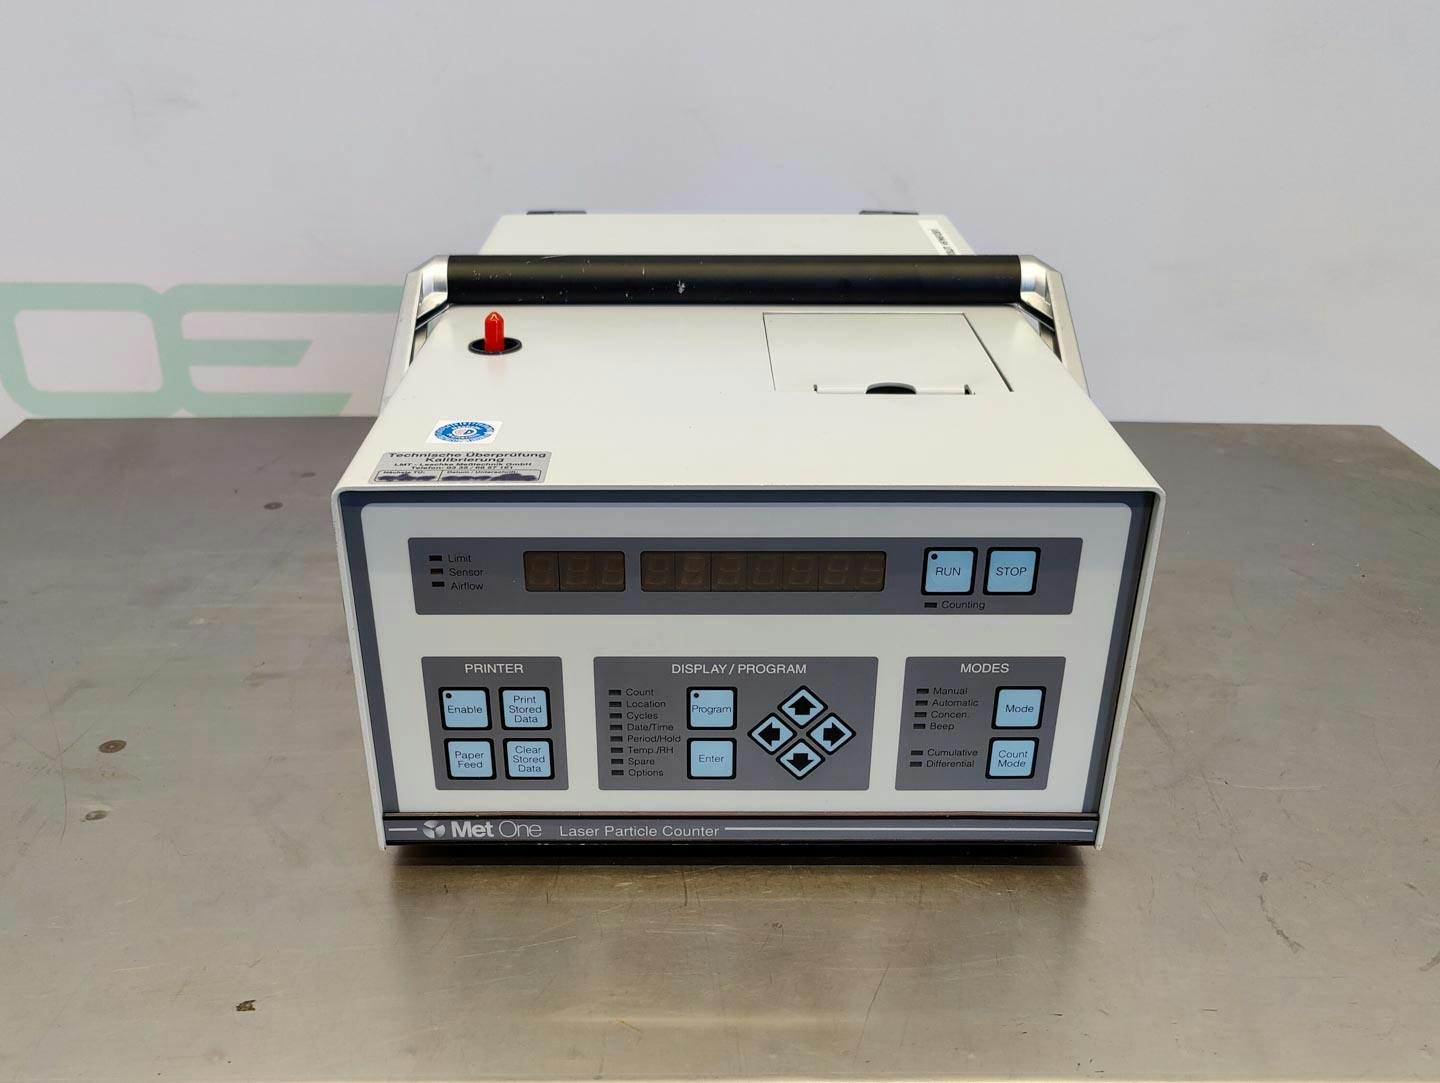 Met One A2408 "laser particle counter" - Inny